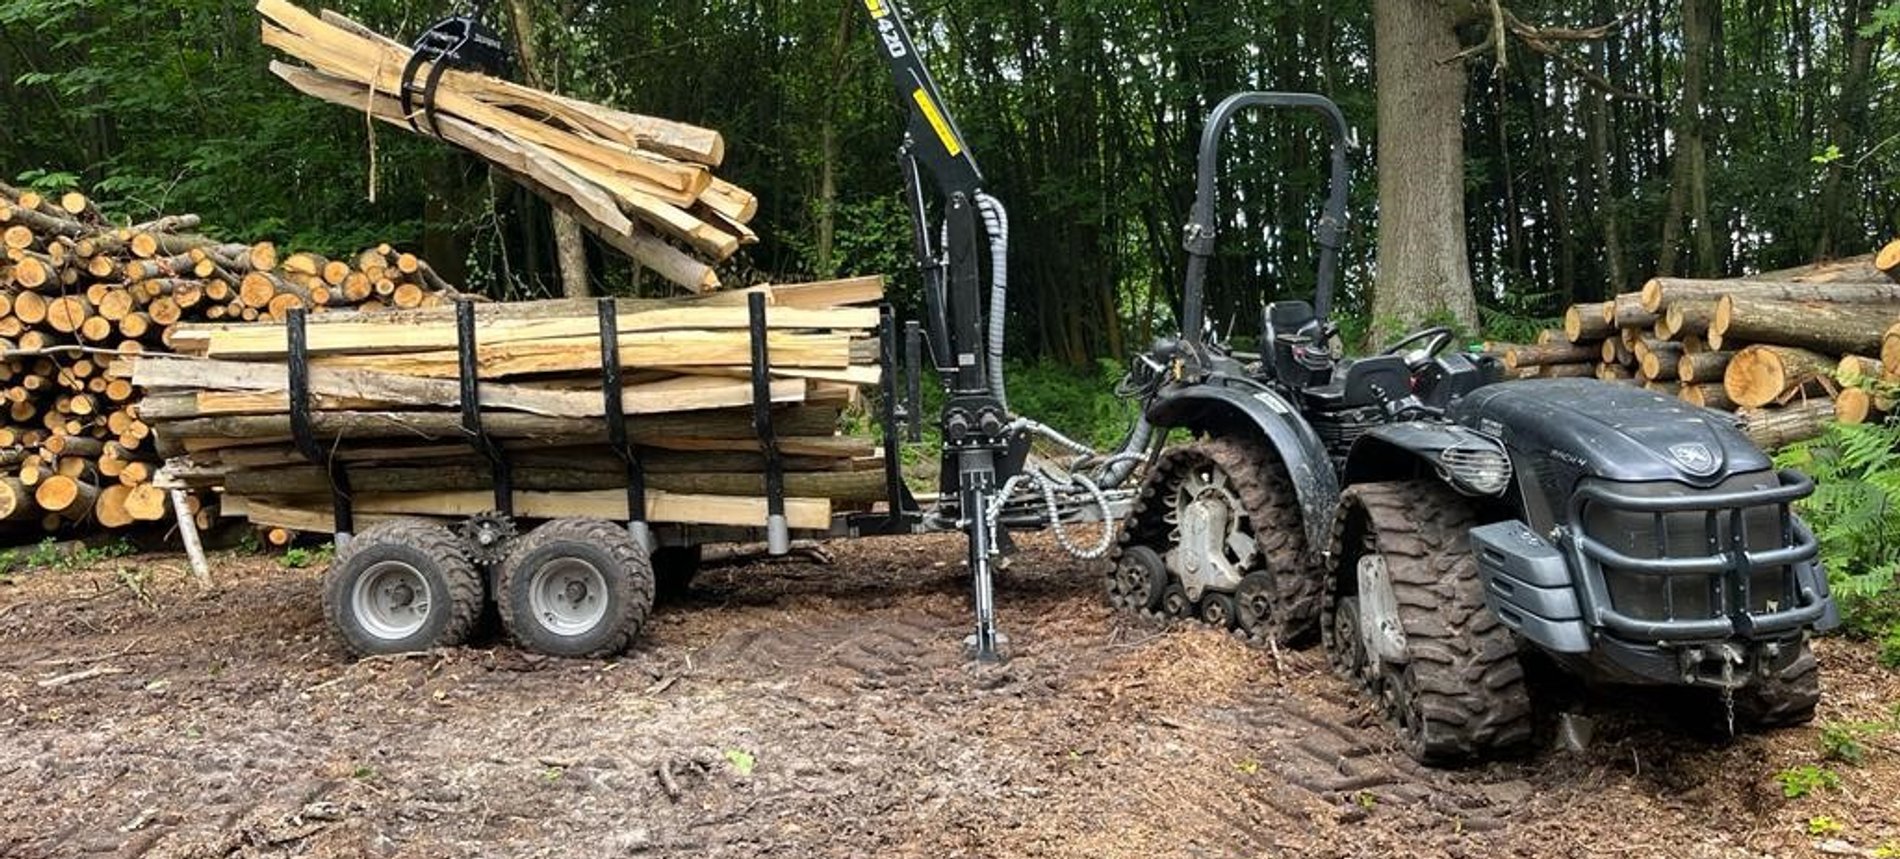 UNBEATABLE MACH 4R | Featured in the Forestry Journal buyers guide